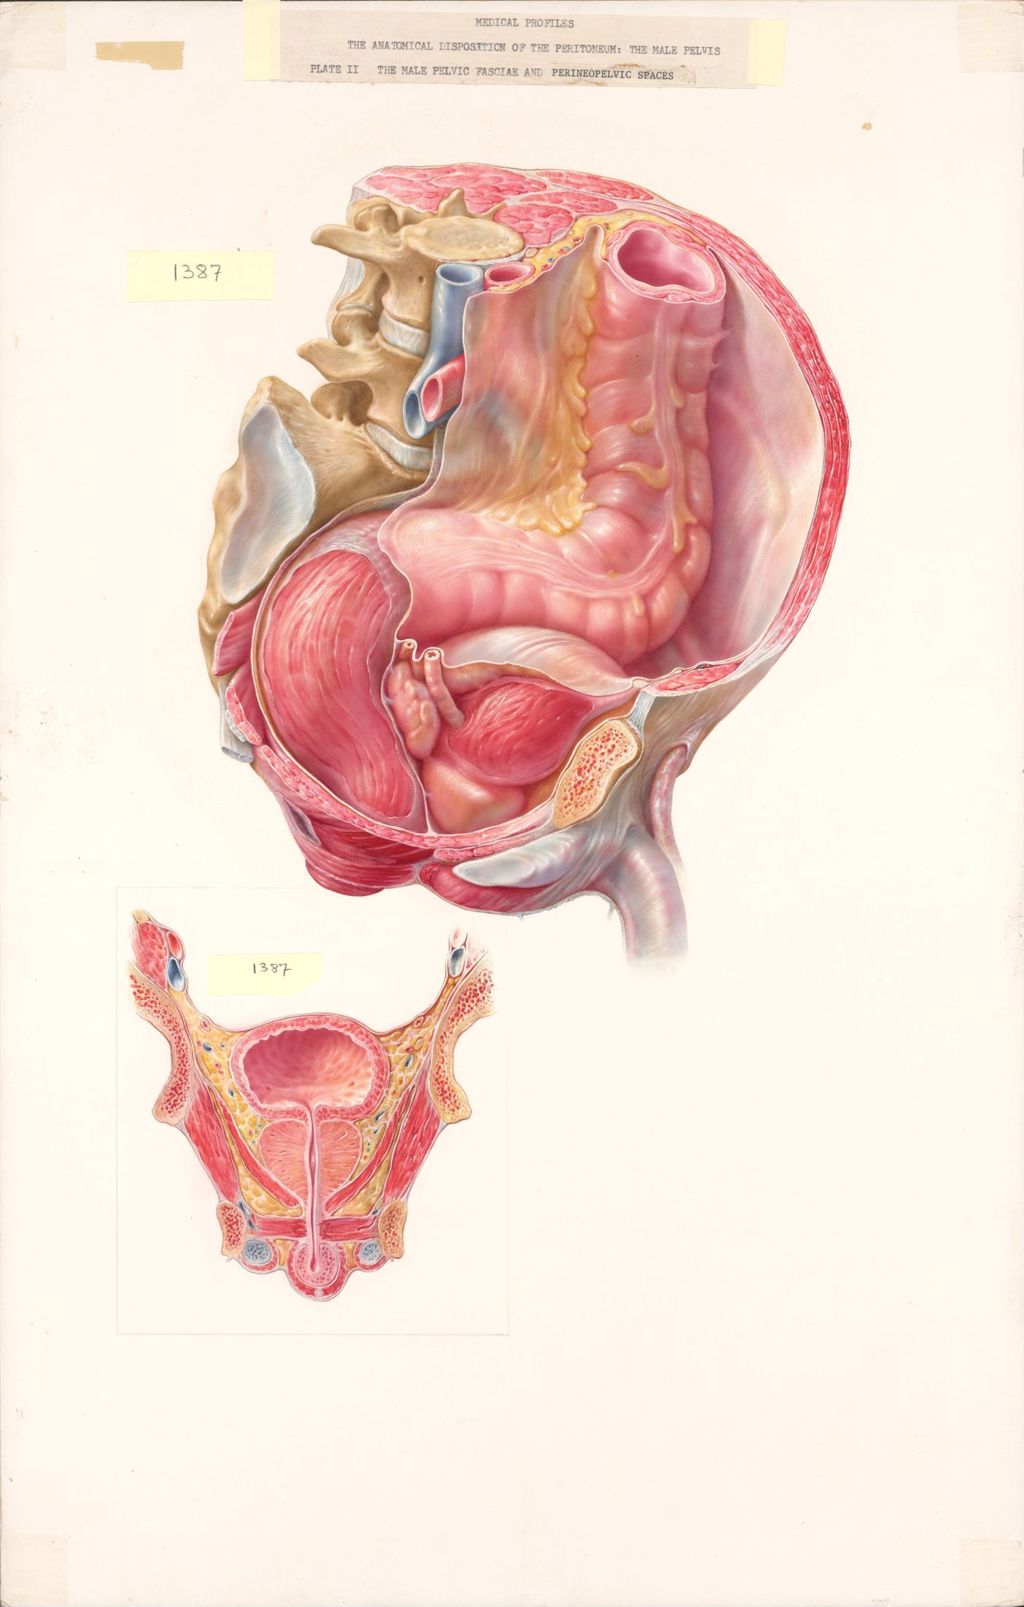 Miniature of Medical Profiles, The Anatomical Disposition of the Peritoneum, The Male Pelvis, Plate II, The Male Pelvic Fasciae and Perineopelvic Spaces